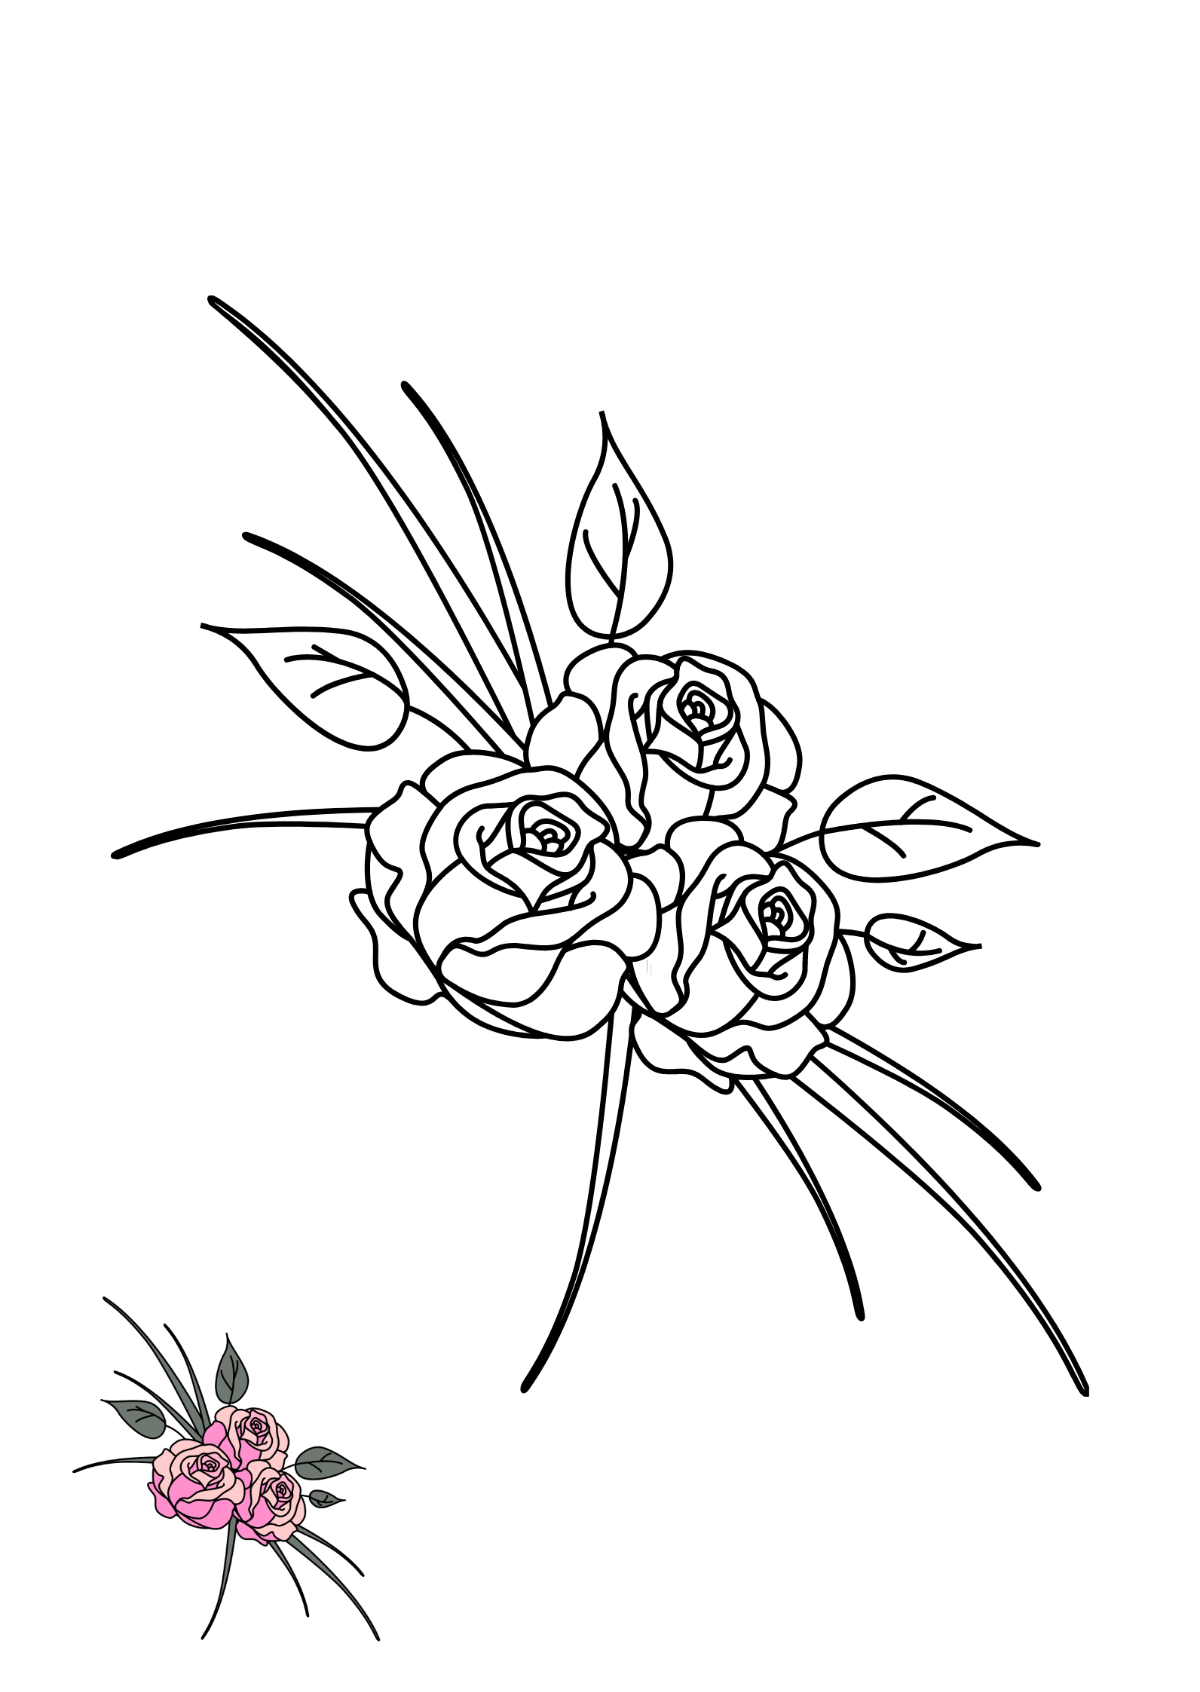 Wedding Floral Design Coloring Page Template